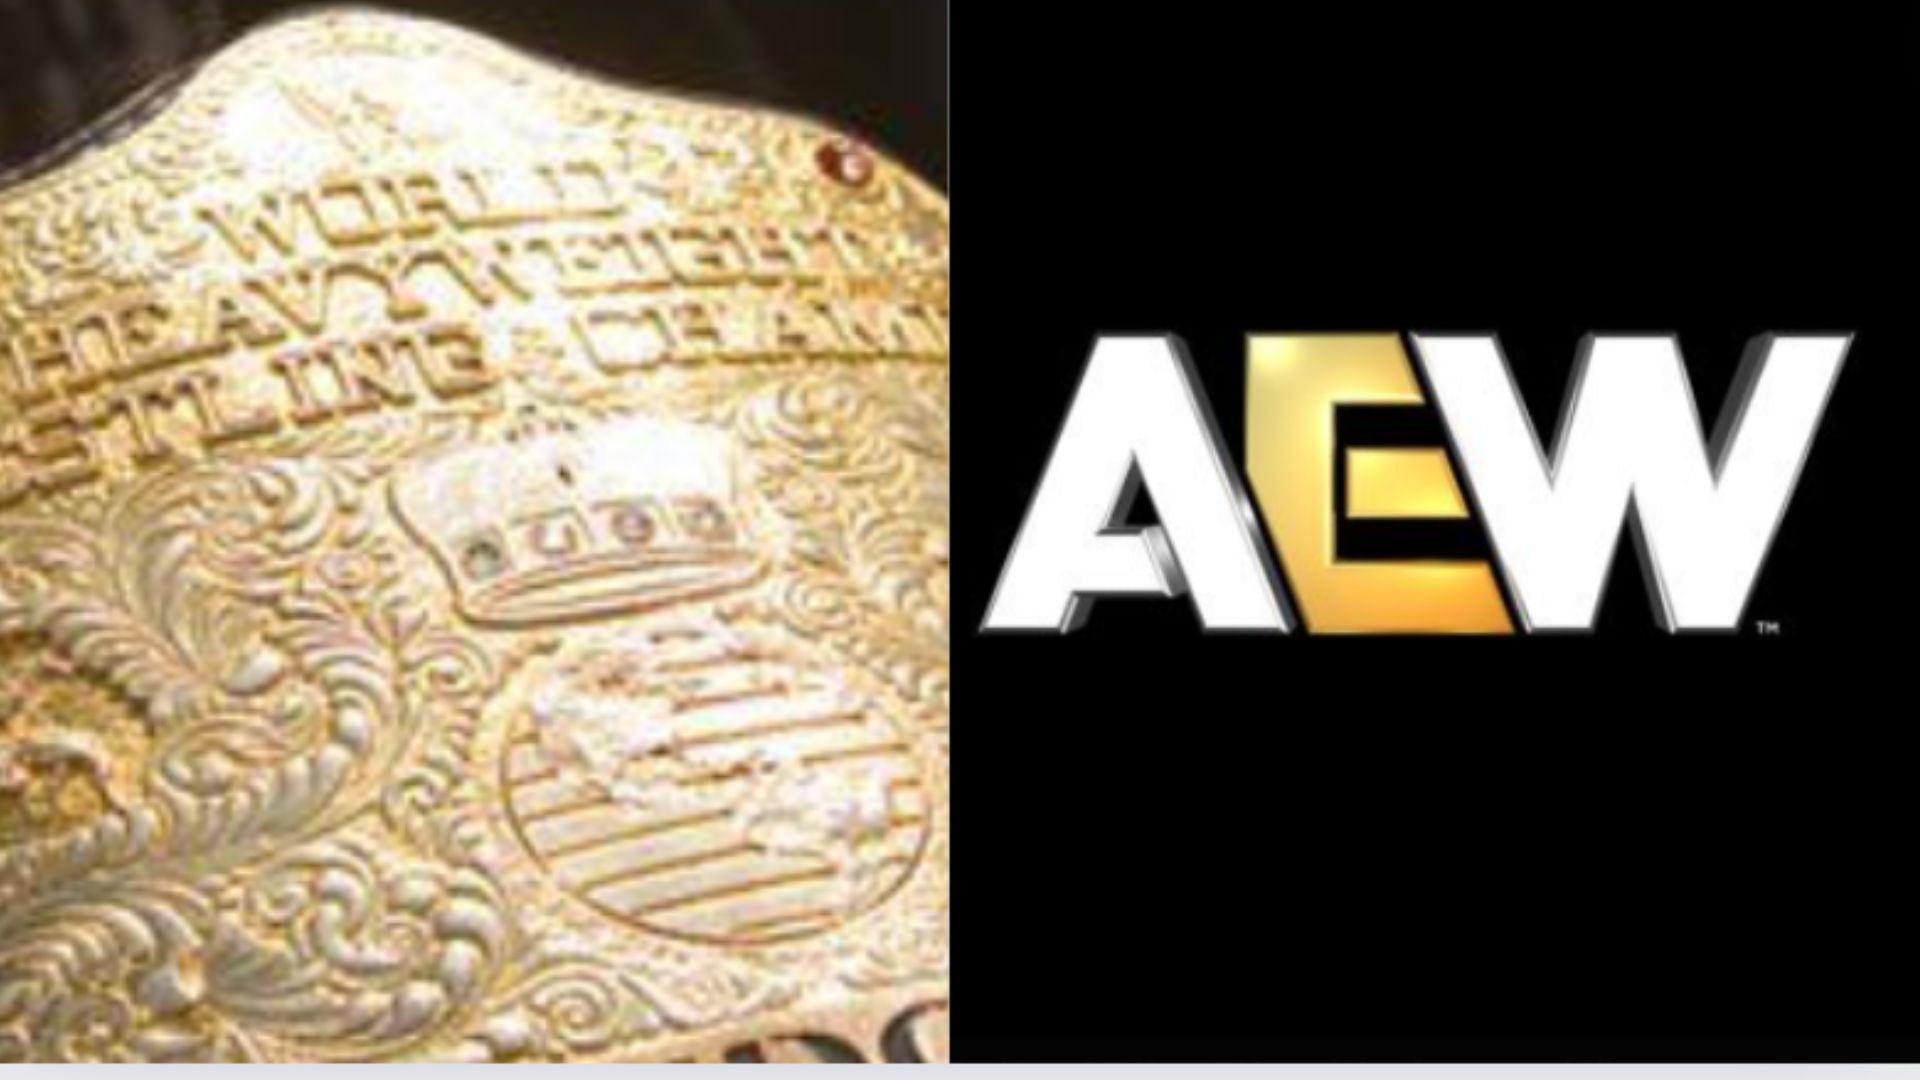 AEW is home to several former WWE talent [Image Credits: WWE